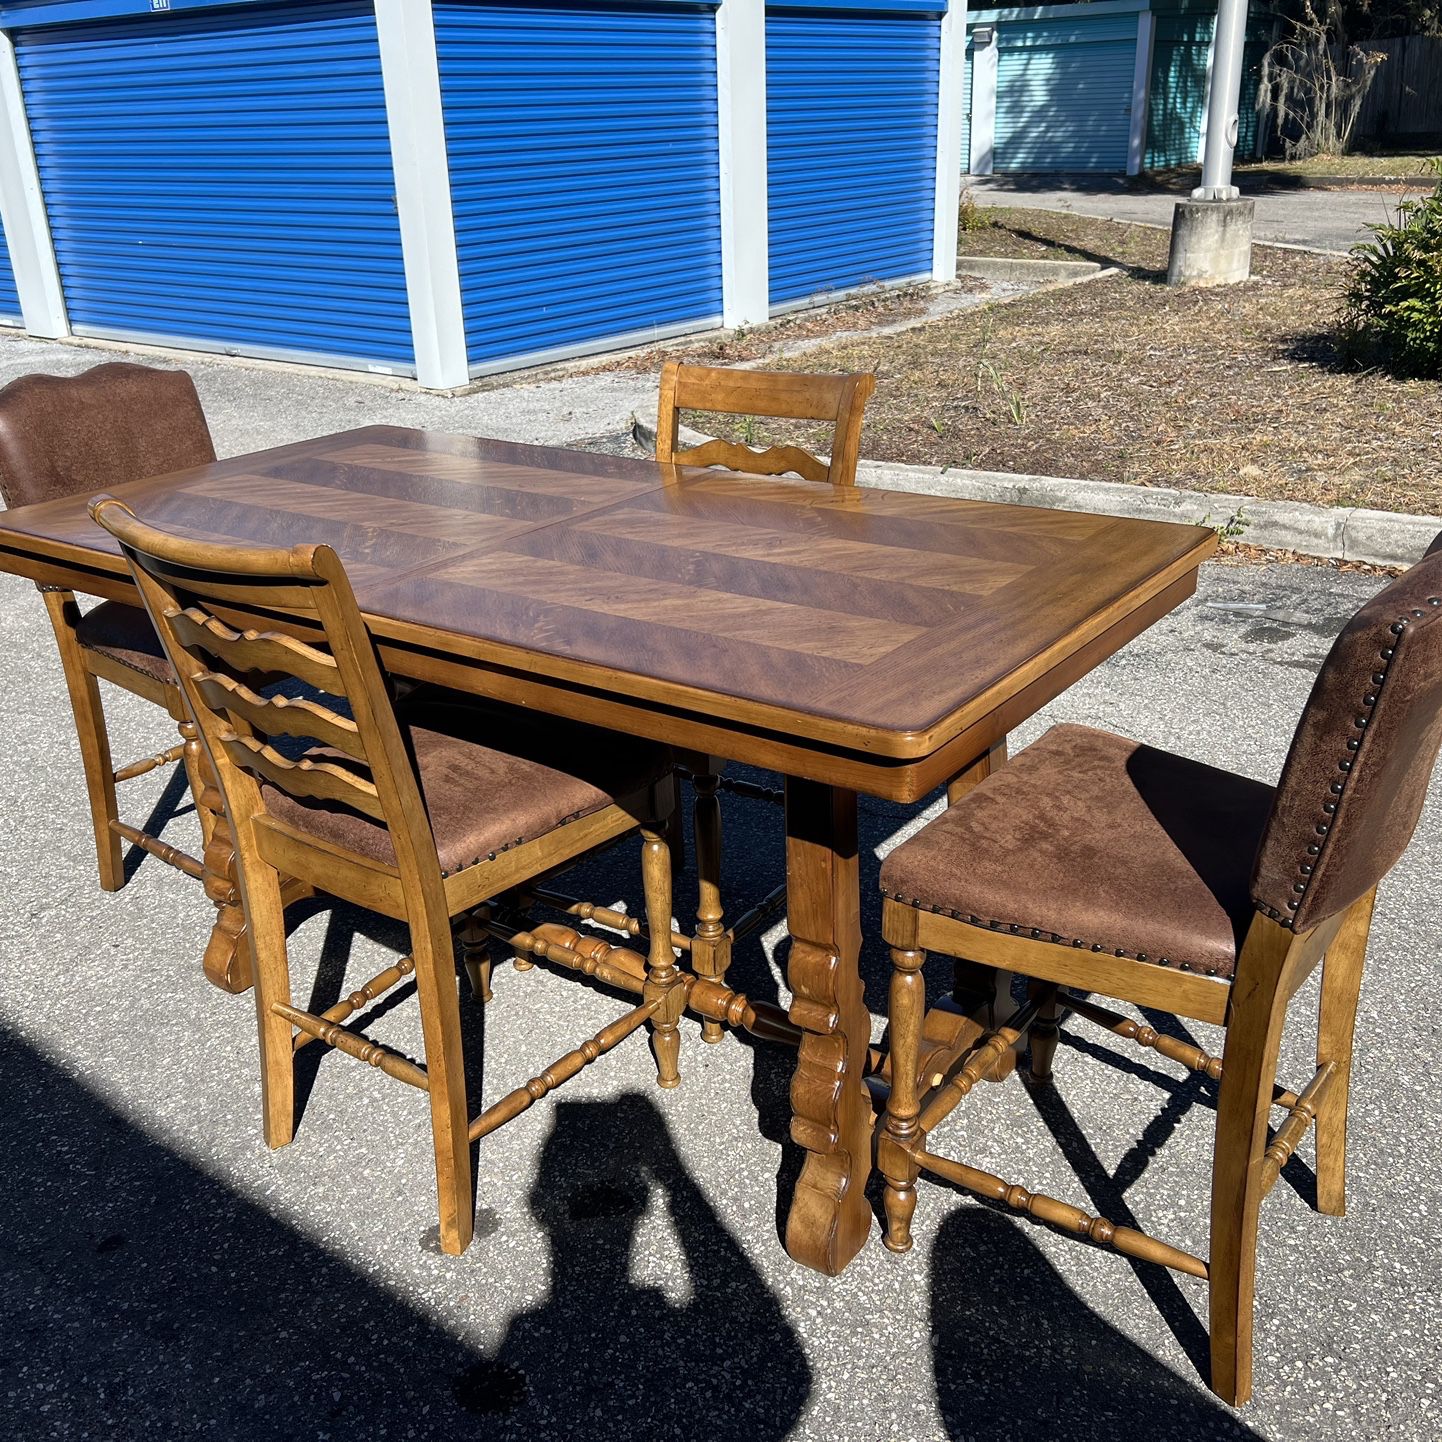 4 Chair Hightop Table